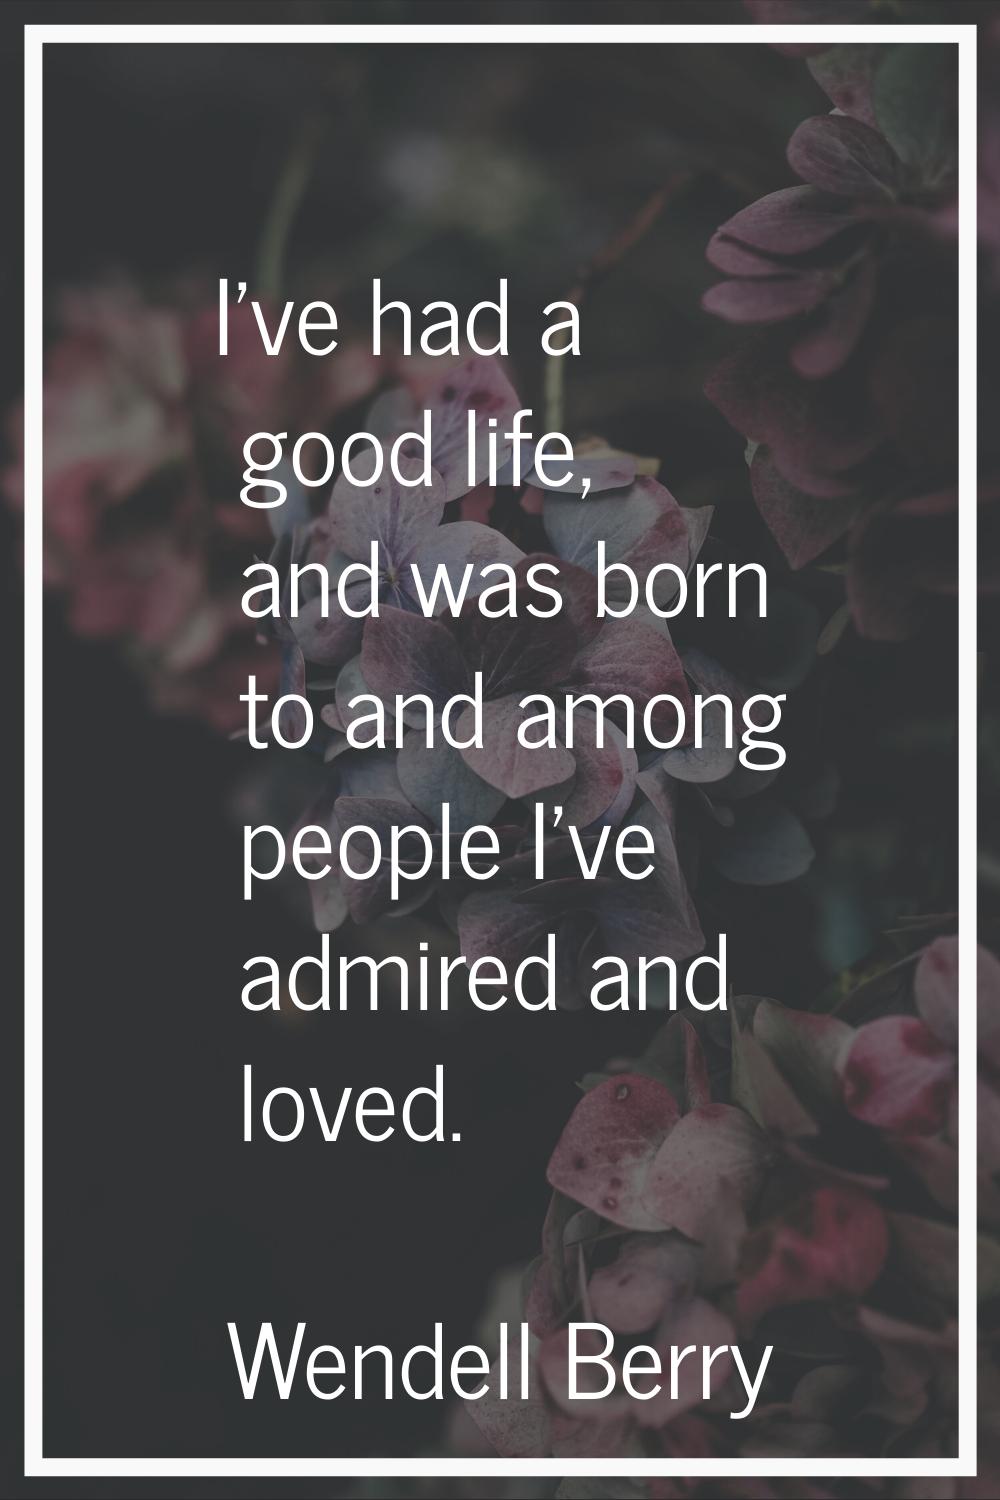 I've had a good life, and was born to and among people I've admired and loved.